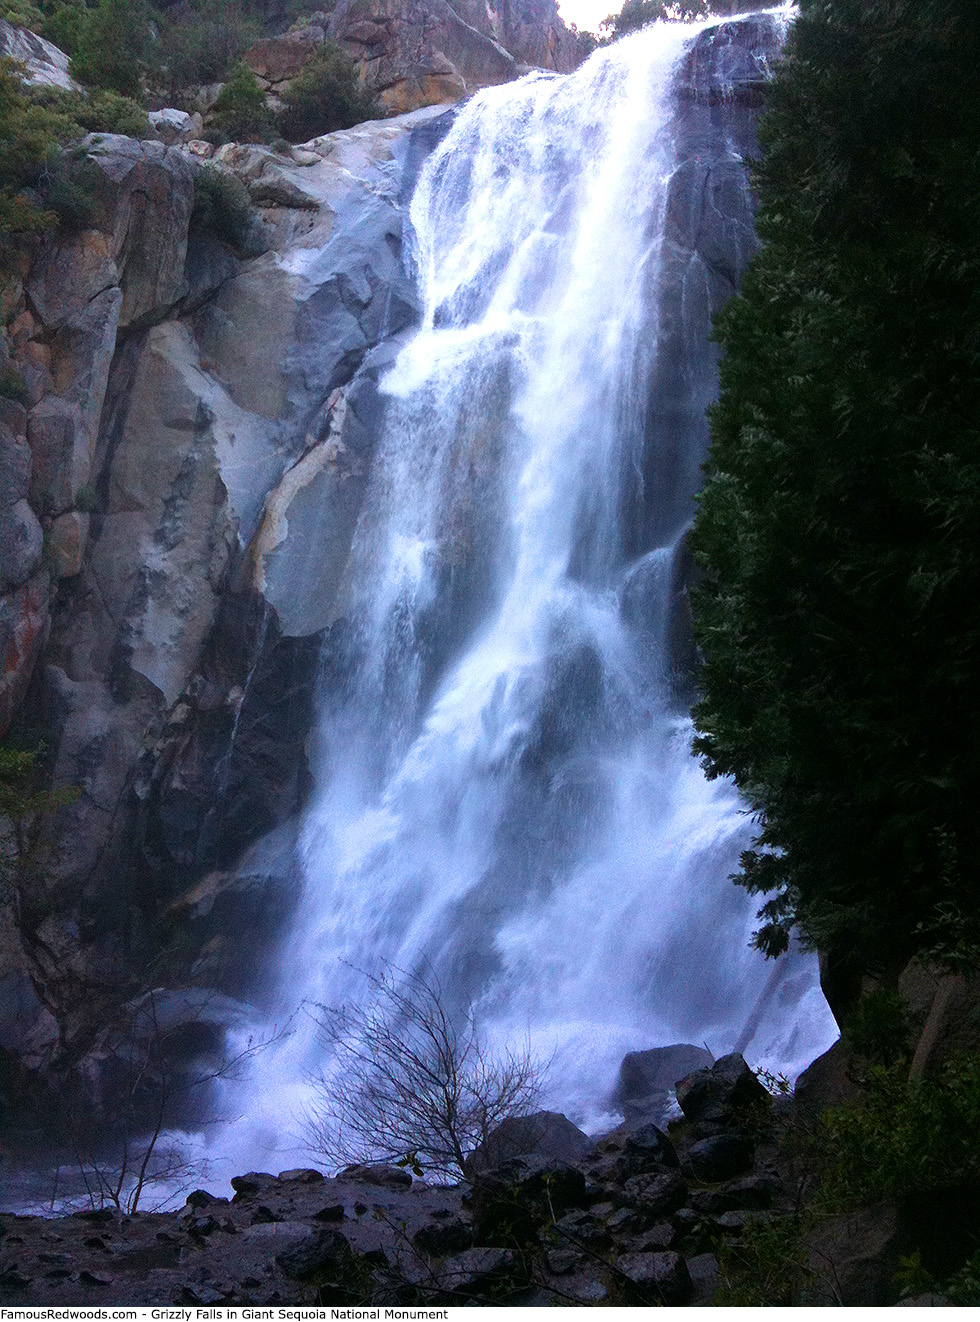 Giant Sequoia National Monument - Grizzly Falls